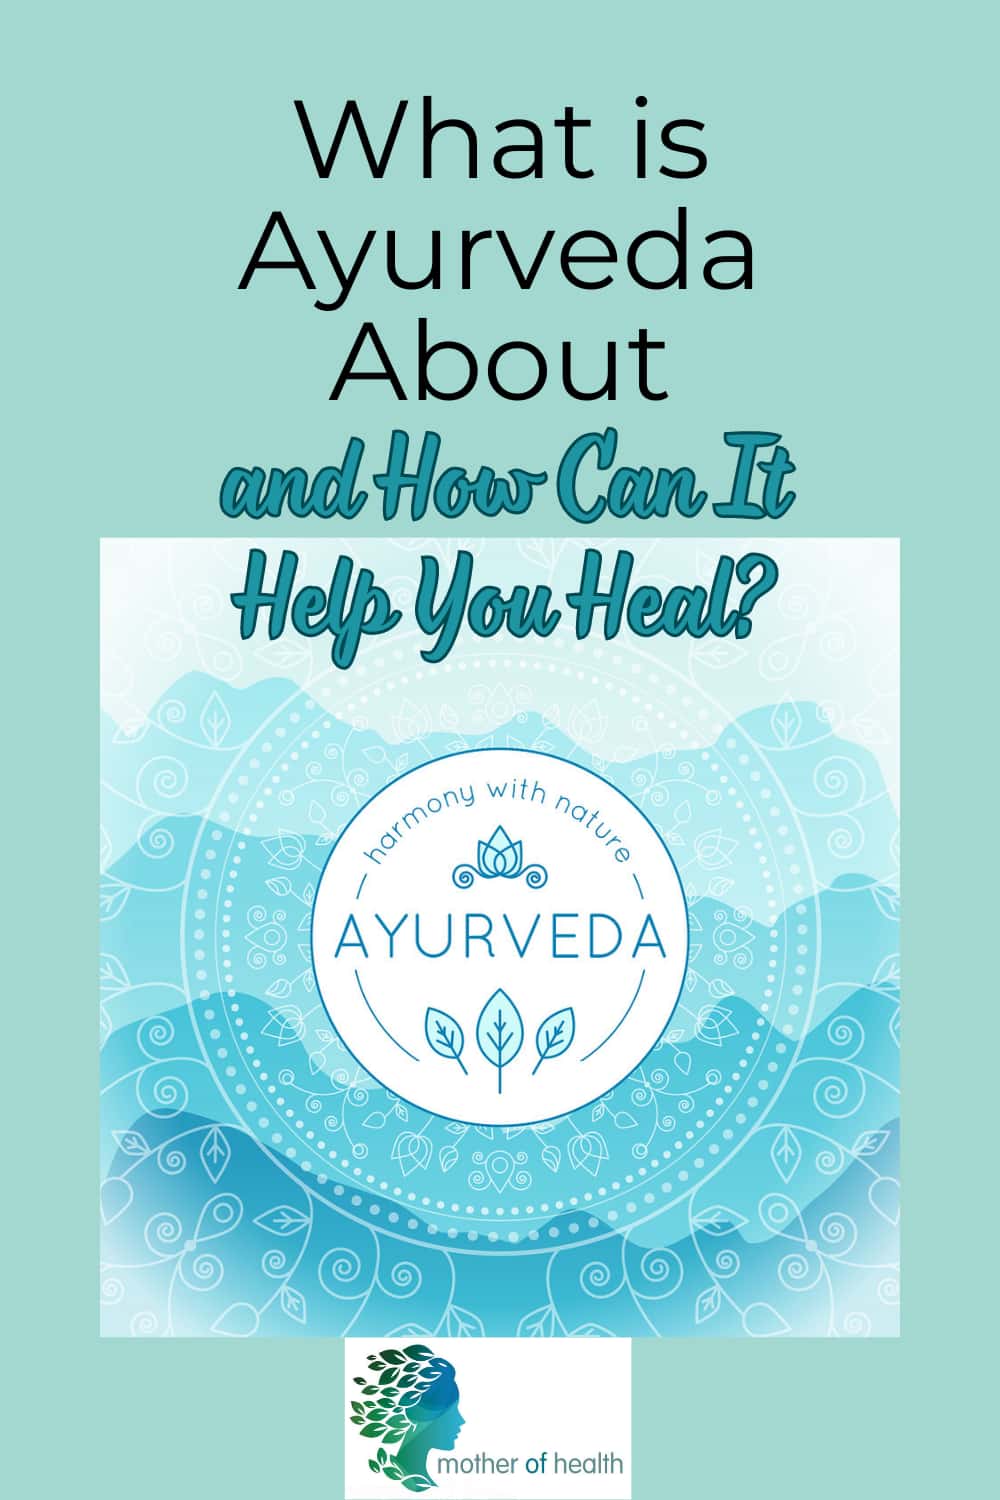 what is ayurveda about?